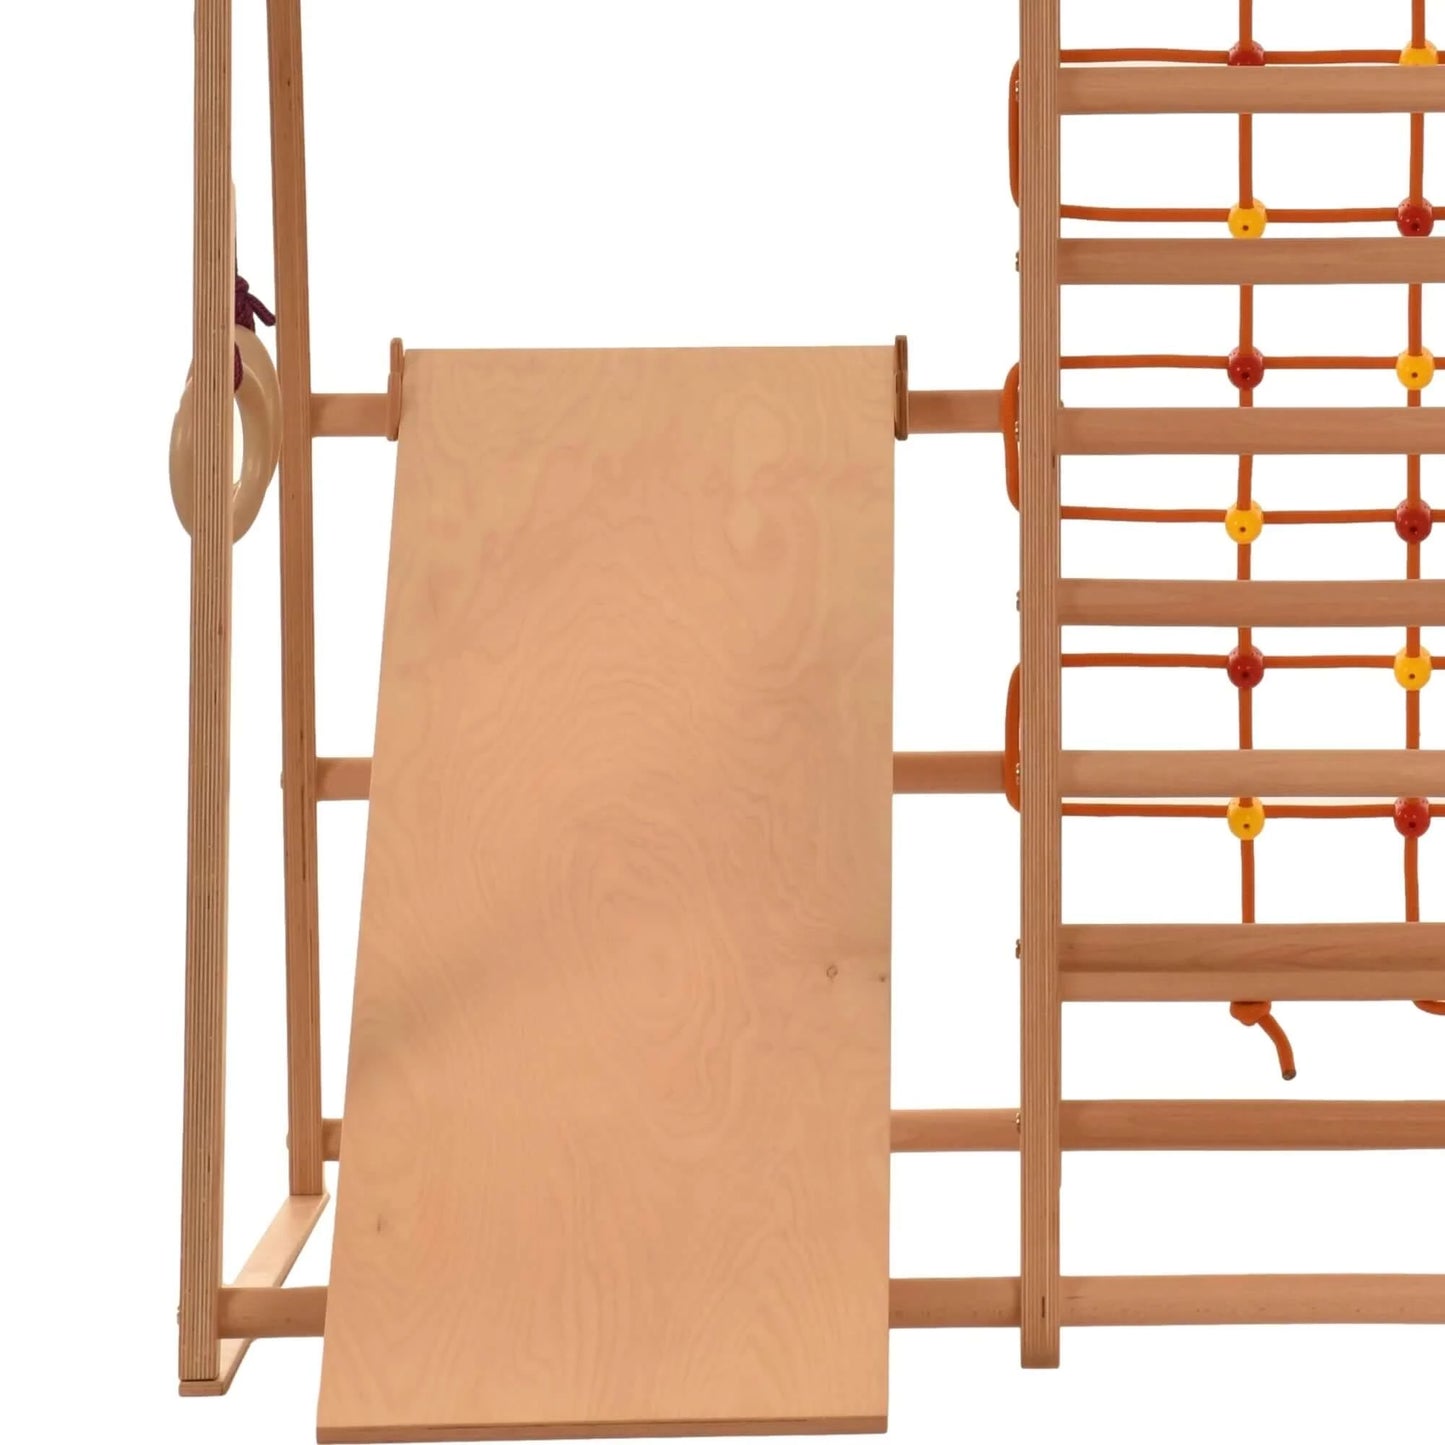 Sliding board / chicken ladder / ramp - accessories for the climbing triangle